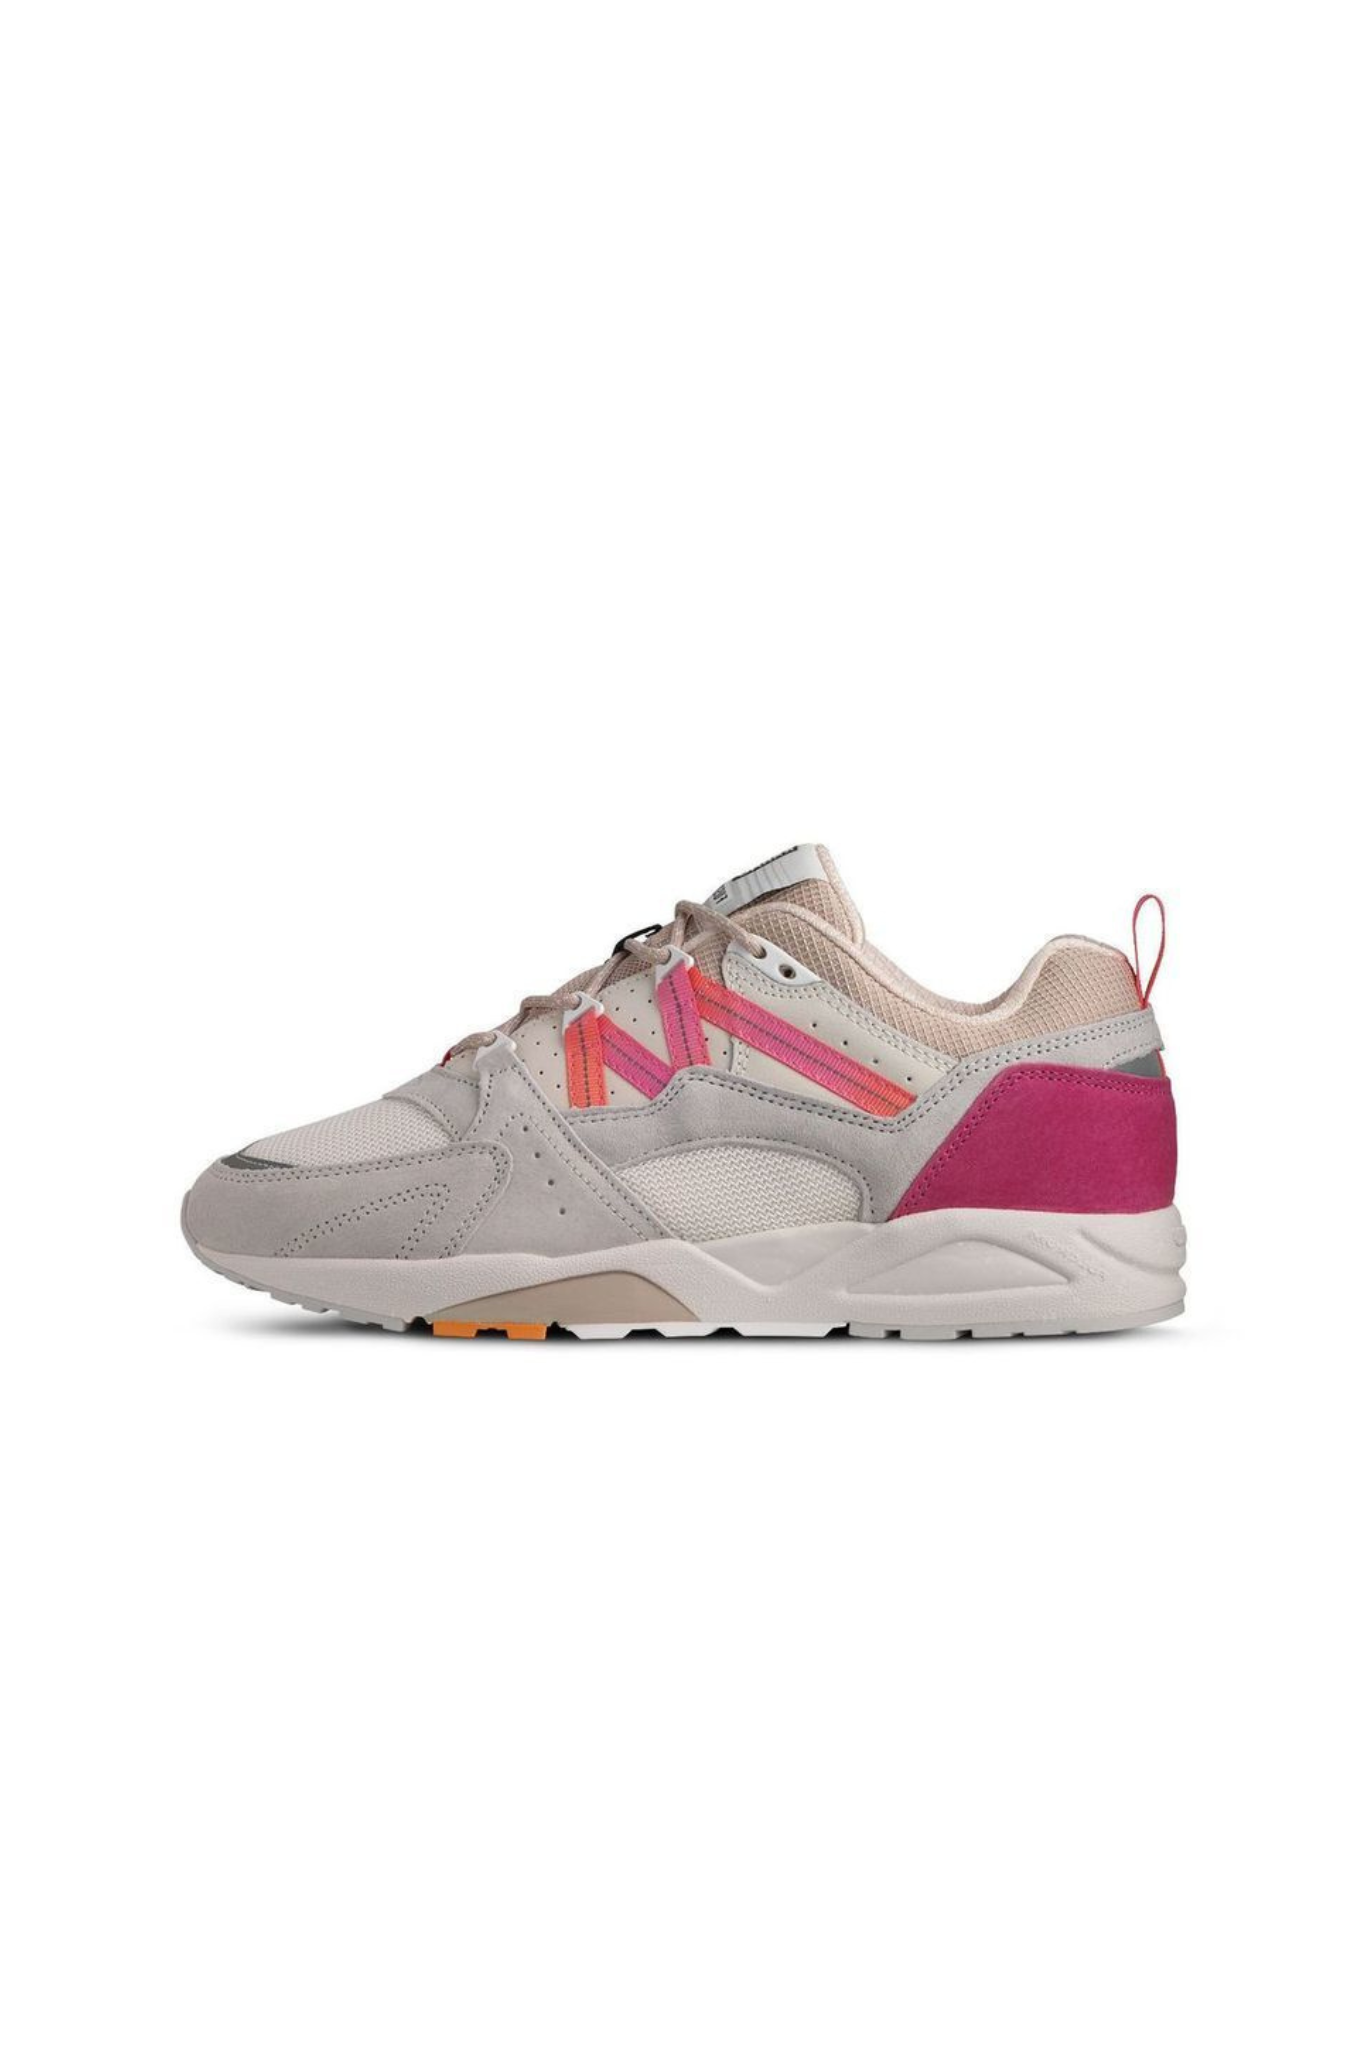 FUSION 2.0 SNEAKER - FOGGY DEW/HOT PINK